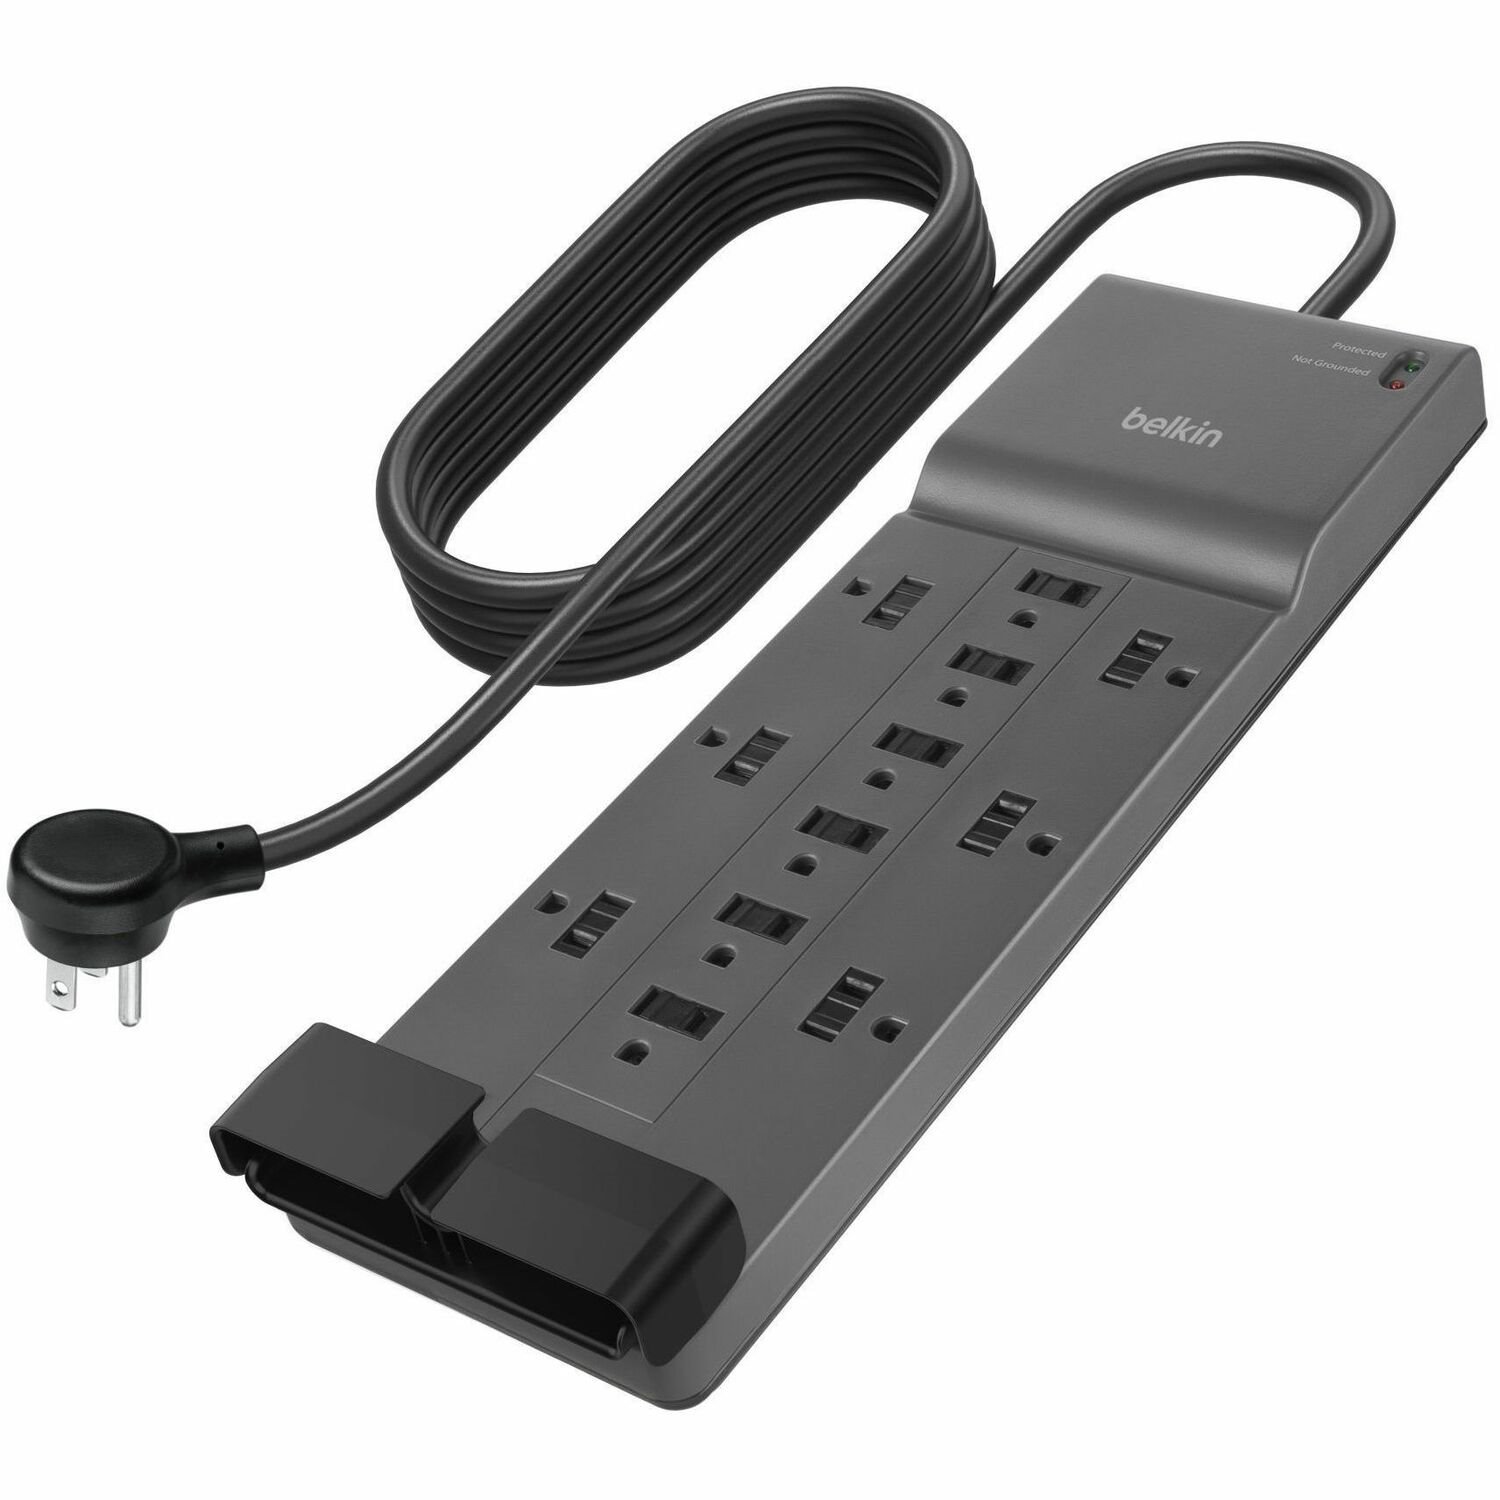 Belkin 12-Outlet Home/Office Surge Protector with 8-foot cord